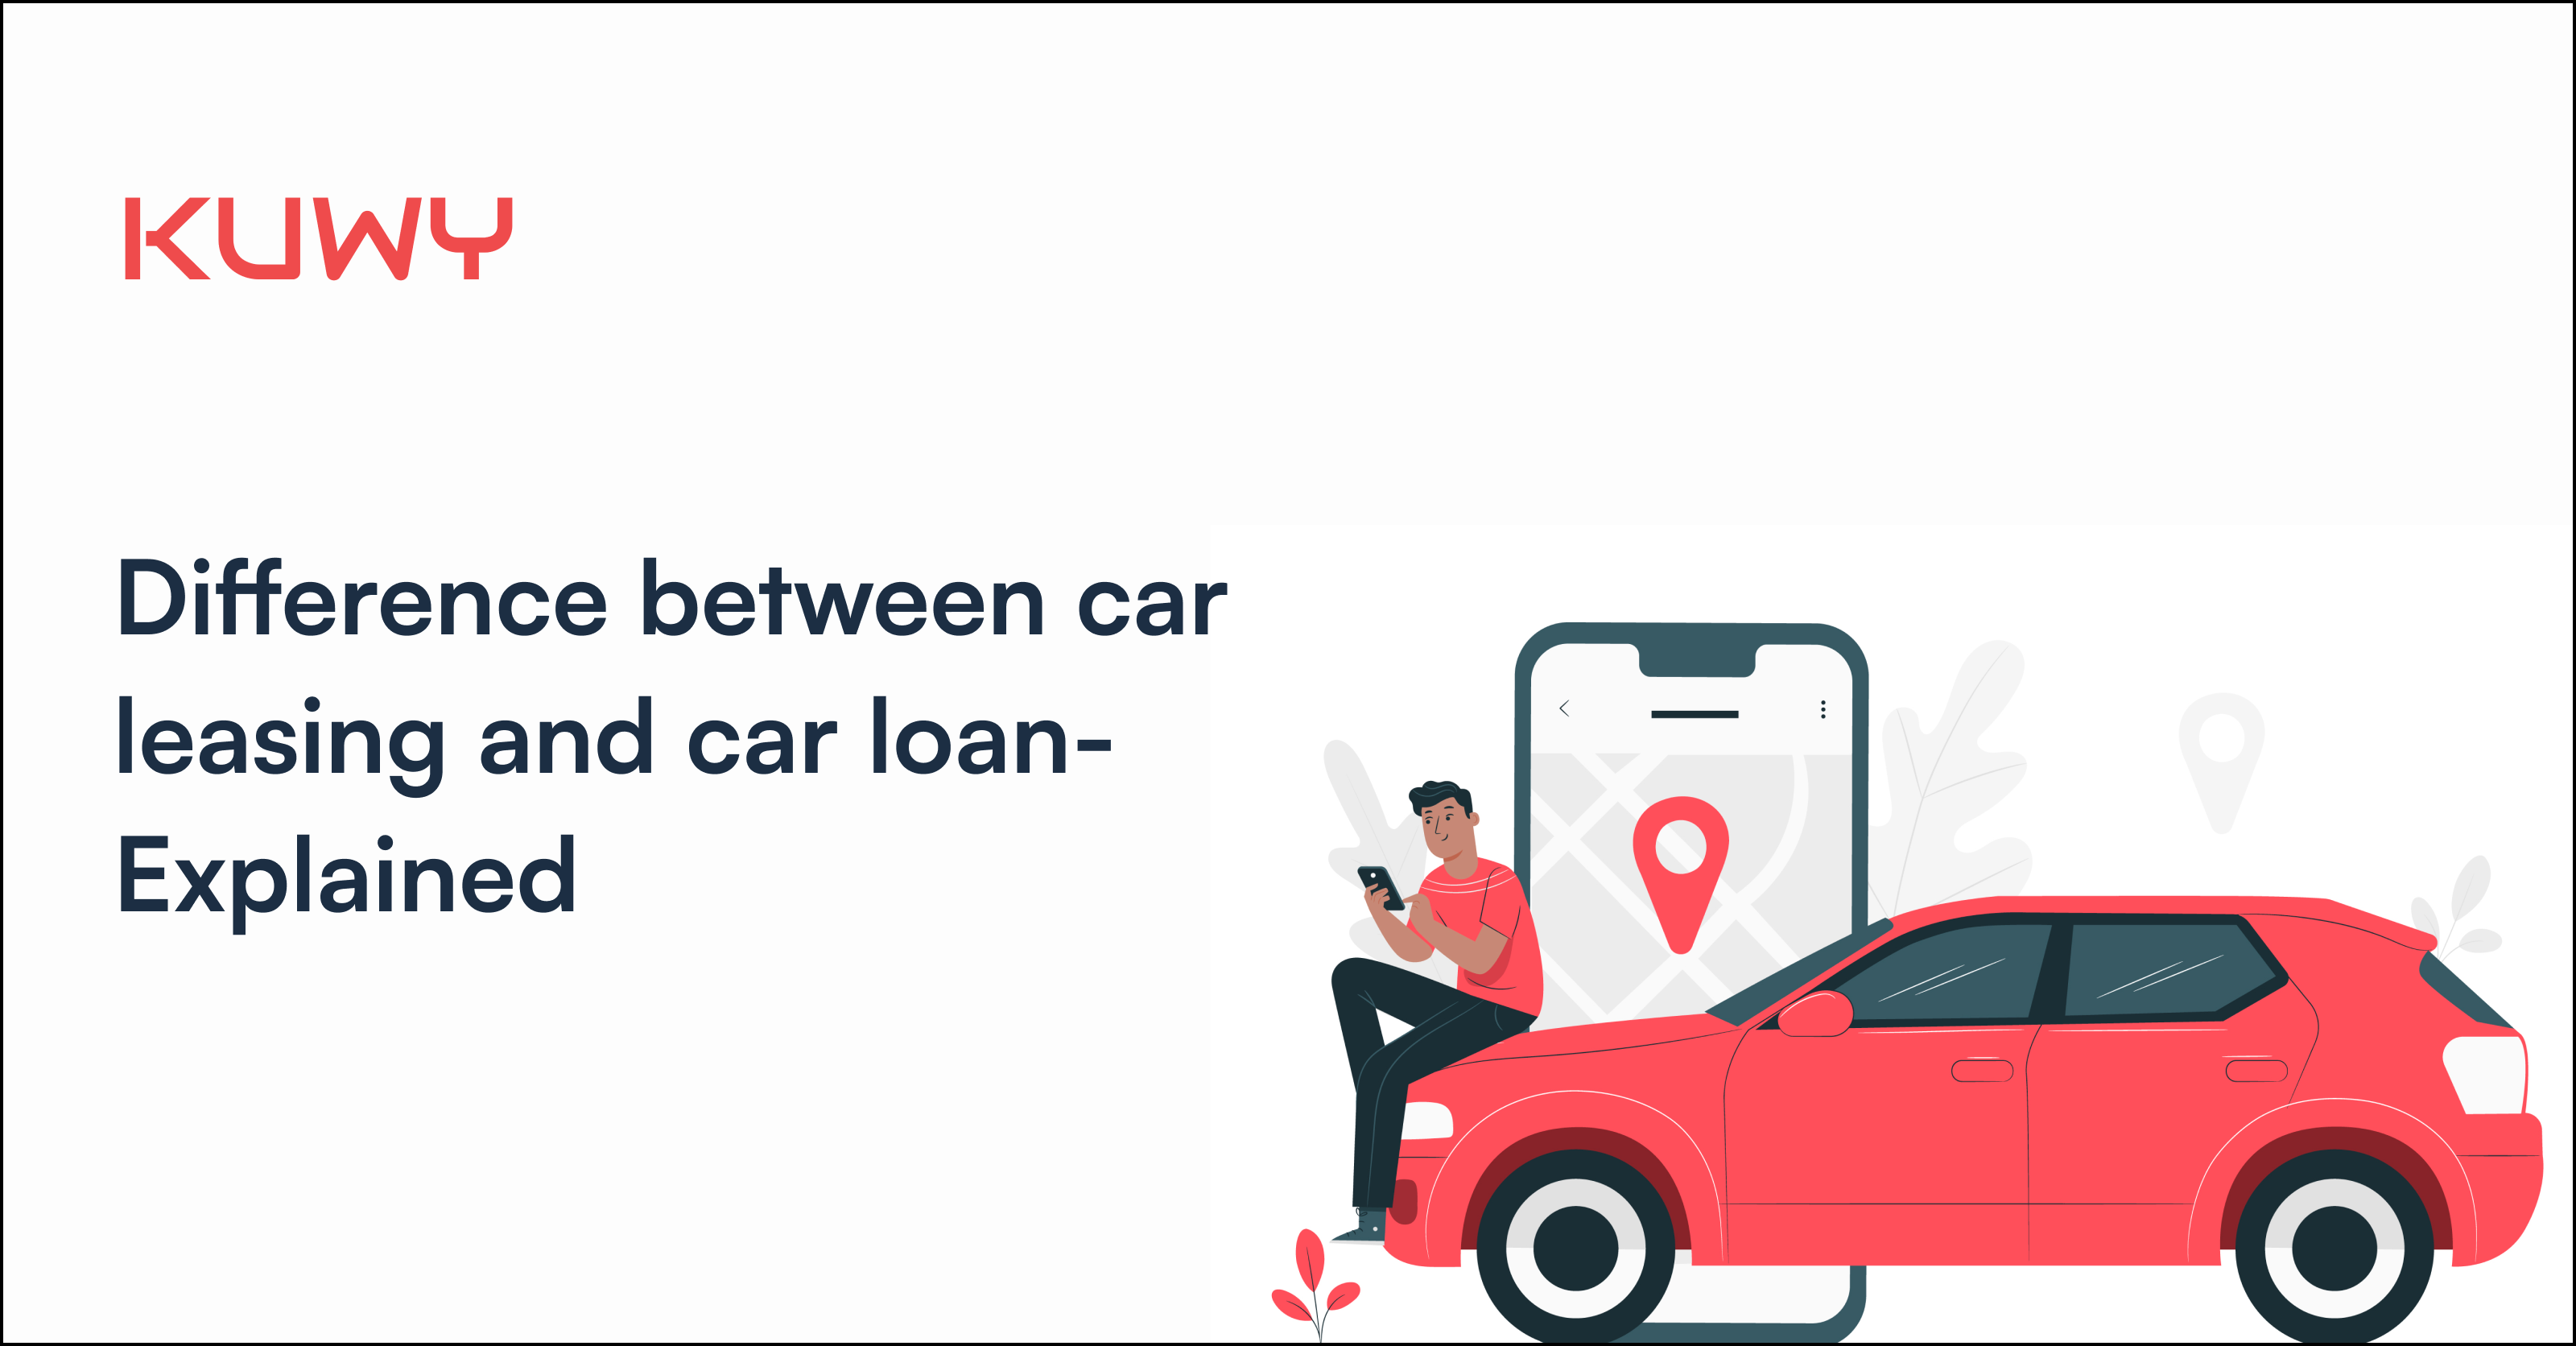 Difference between car leasing and car loan - Explained.